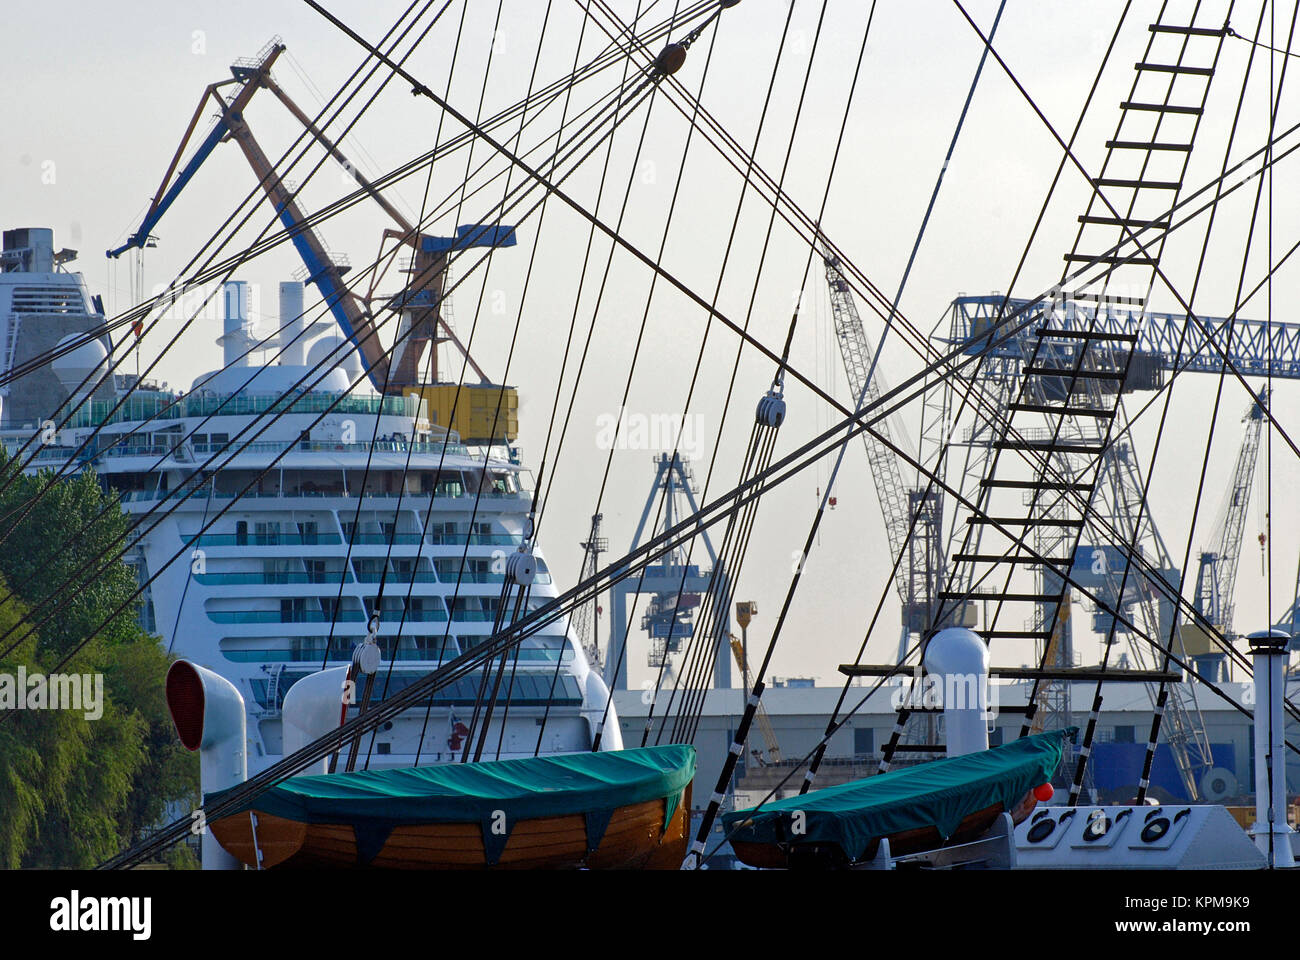 Hamburg, one of the most beautiful and most popular tourist destinations in the world. Rigging of a sailor in the port of Hamburg. Stock Photo